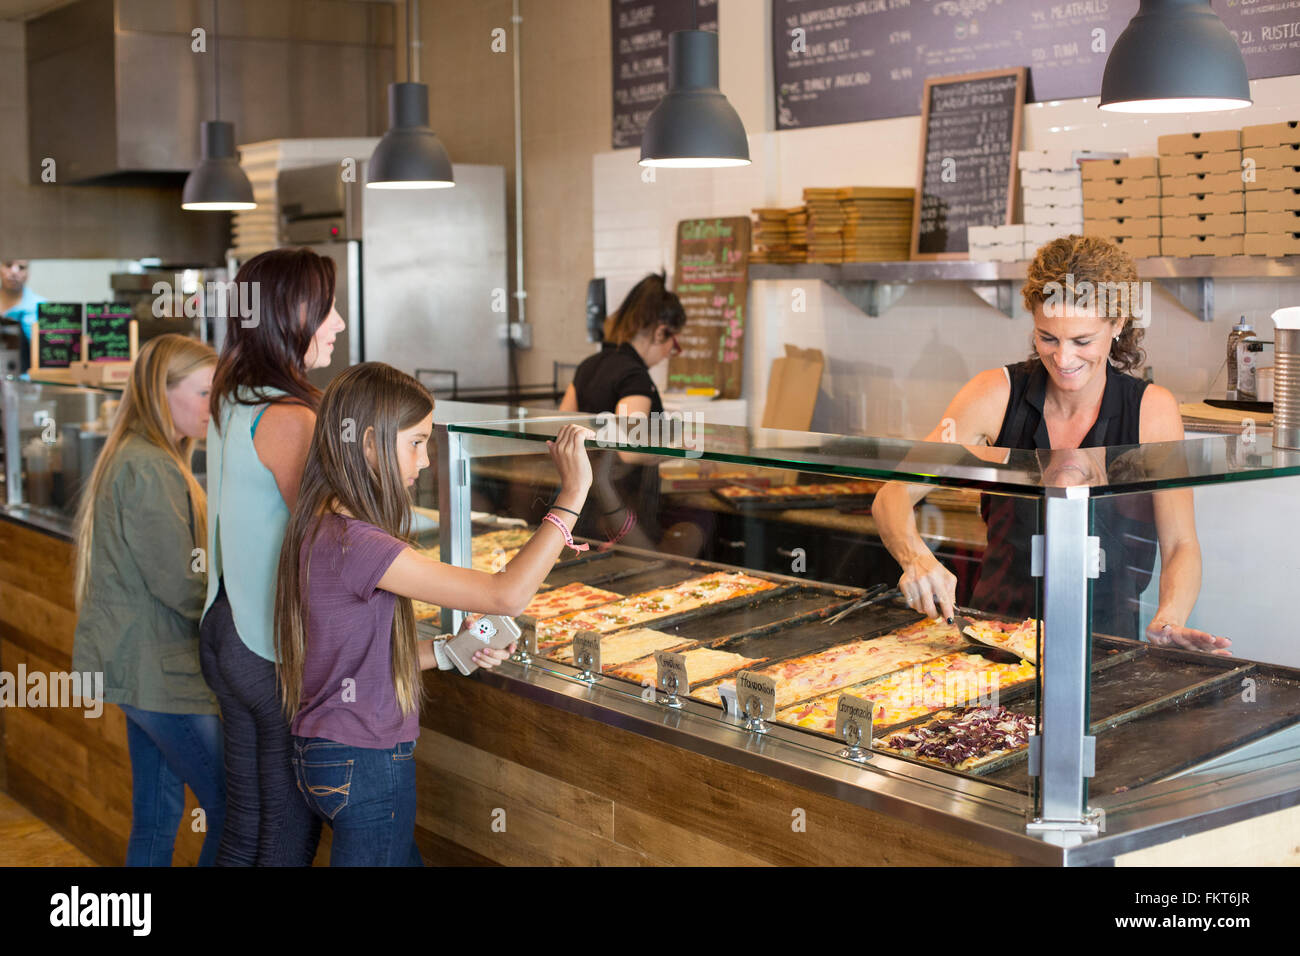 Customers choosing pizza in cafe Stock Photo